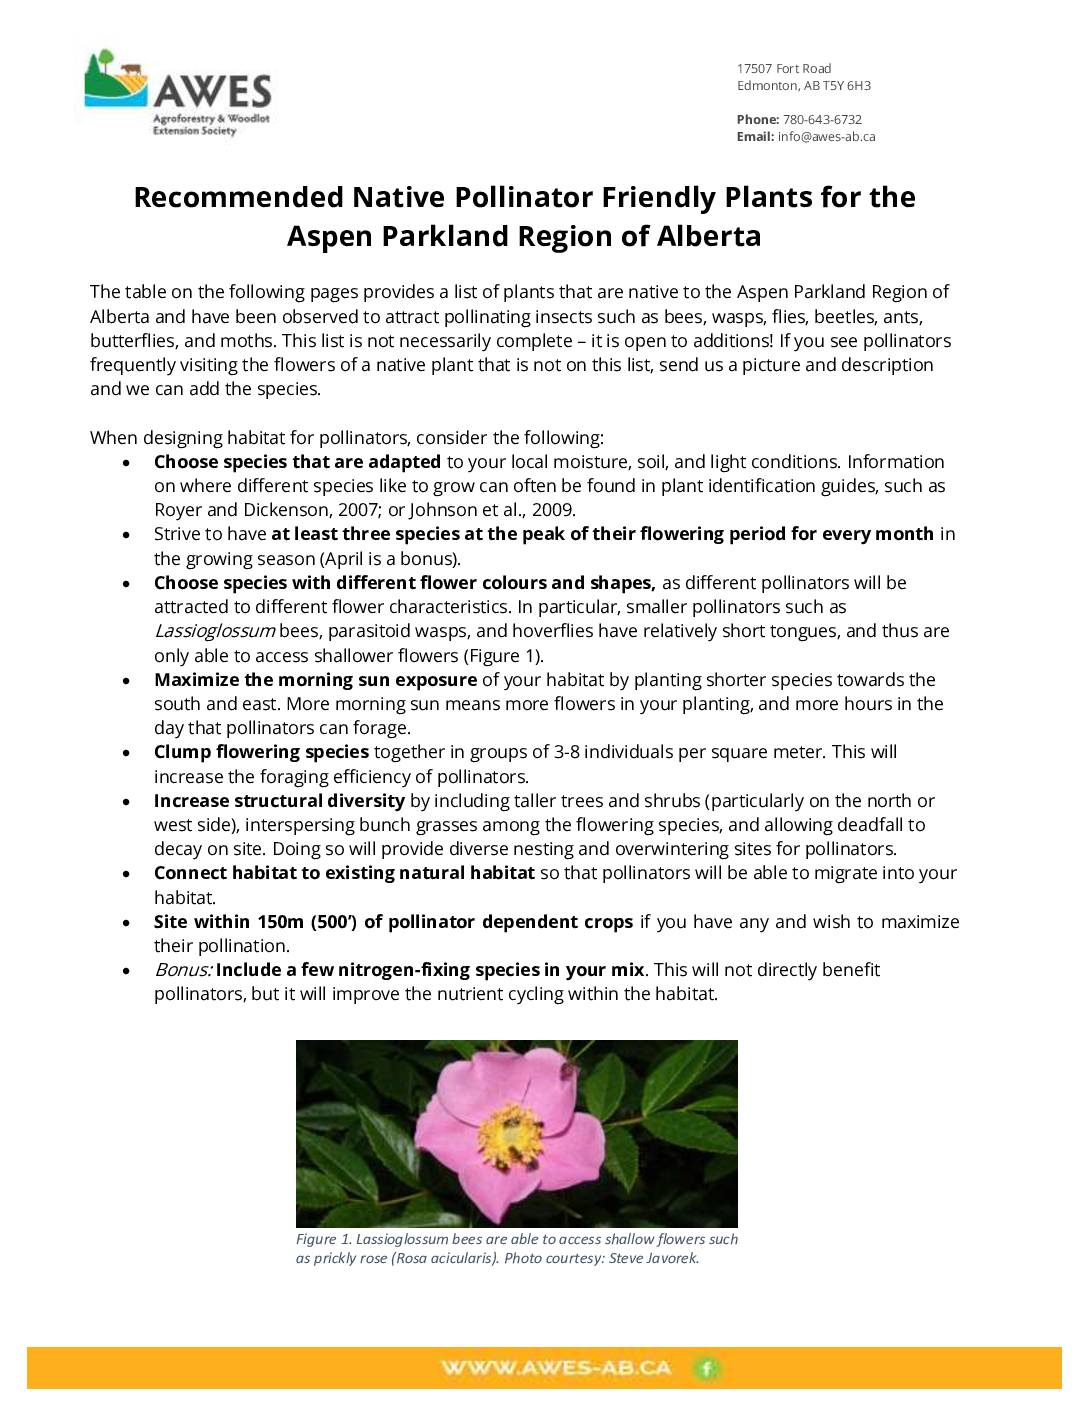 Recommended Native Pollinator Friendly Plants for the Aspen Parkland Region of Alberta